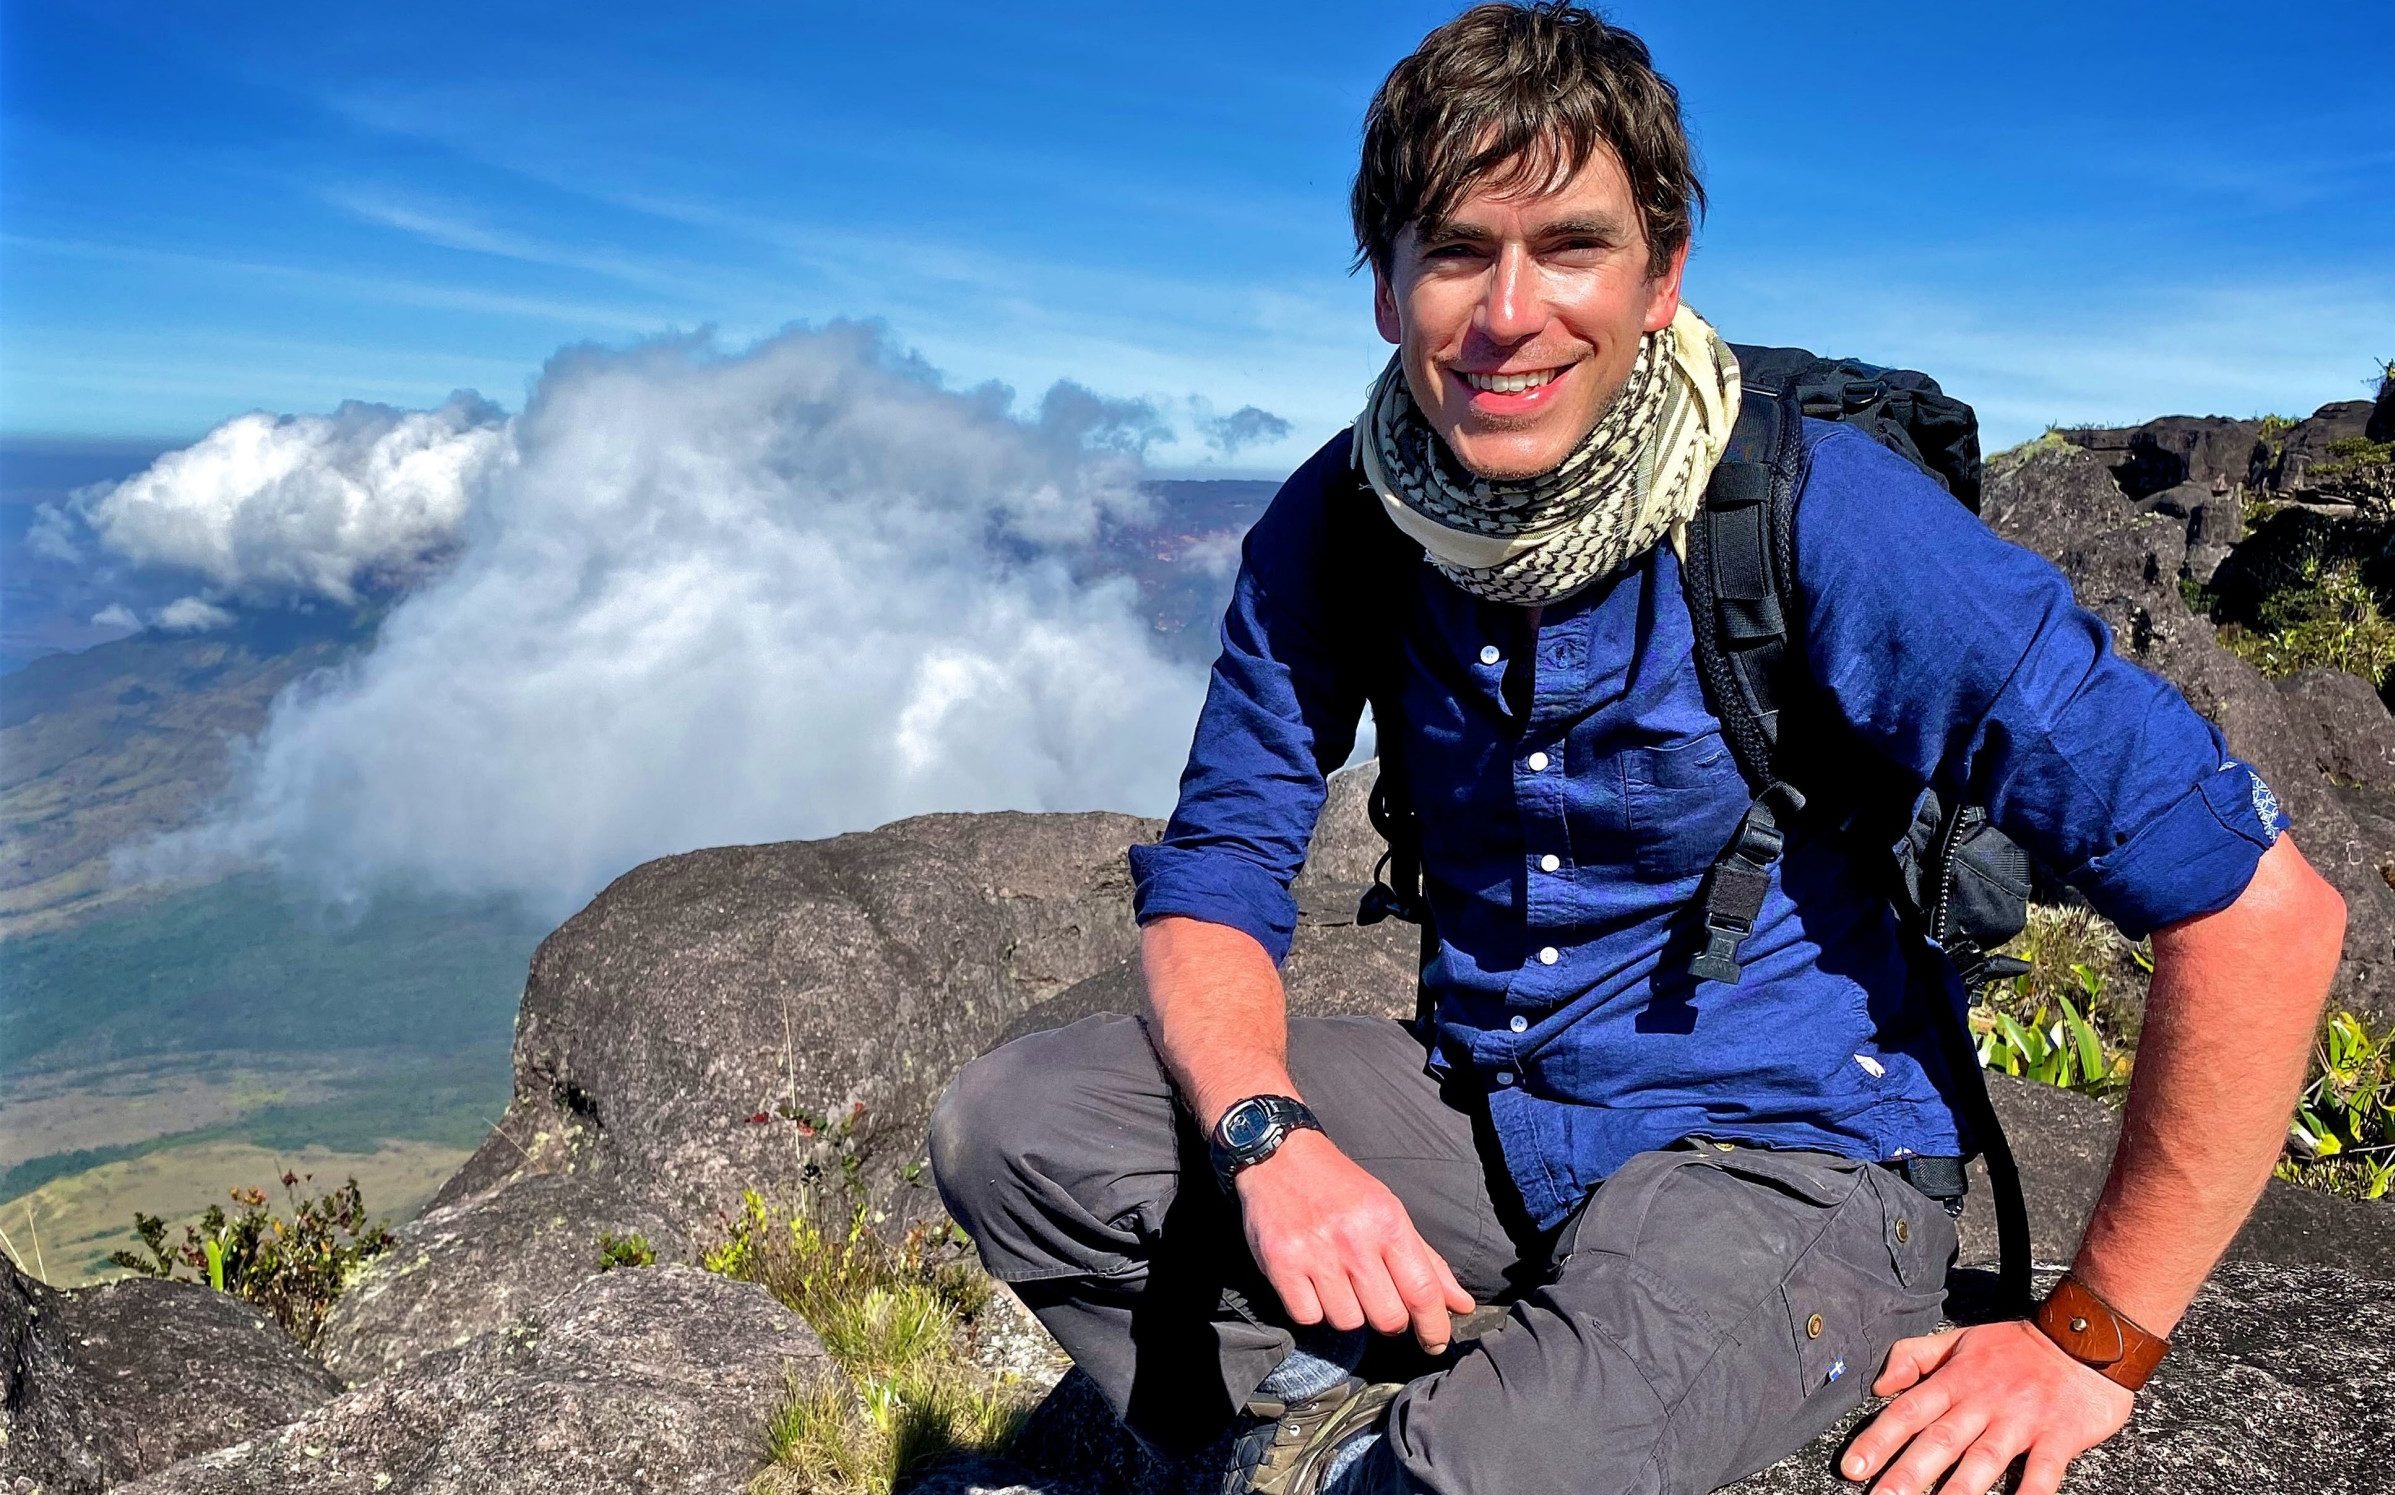 South America with Simon Reeve